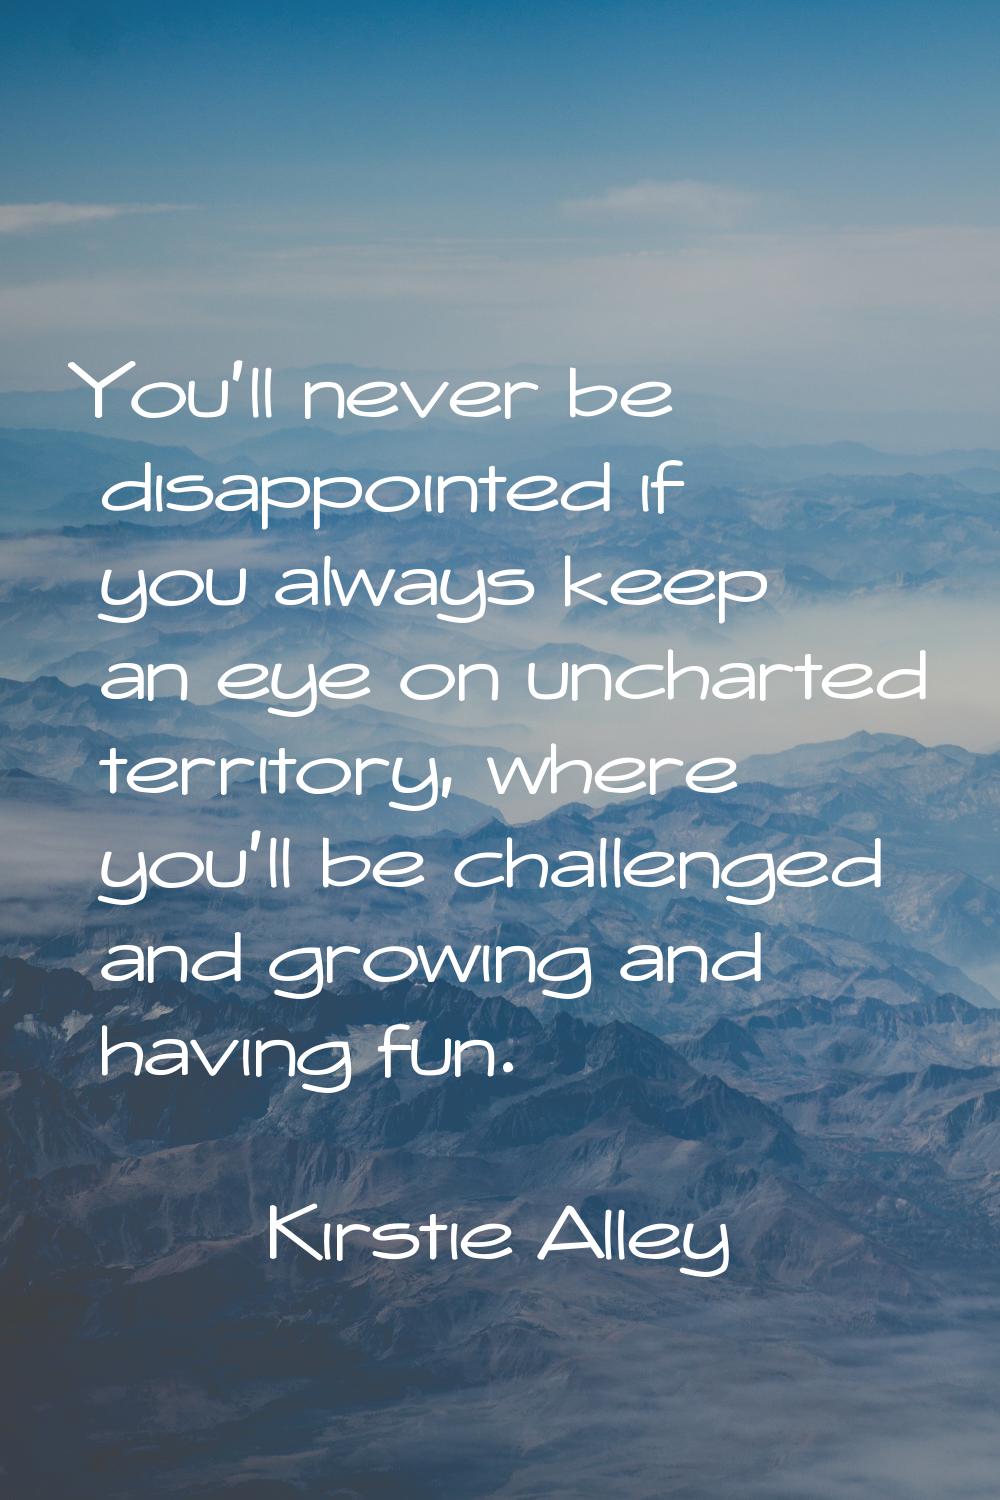 You'll never be disappointed if you always keep an eye on uncharted territory, where you'll be chal